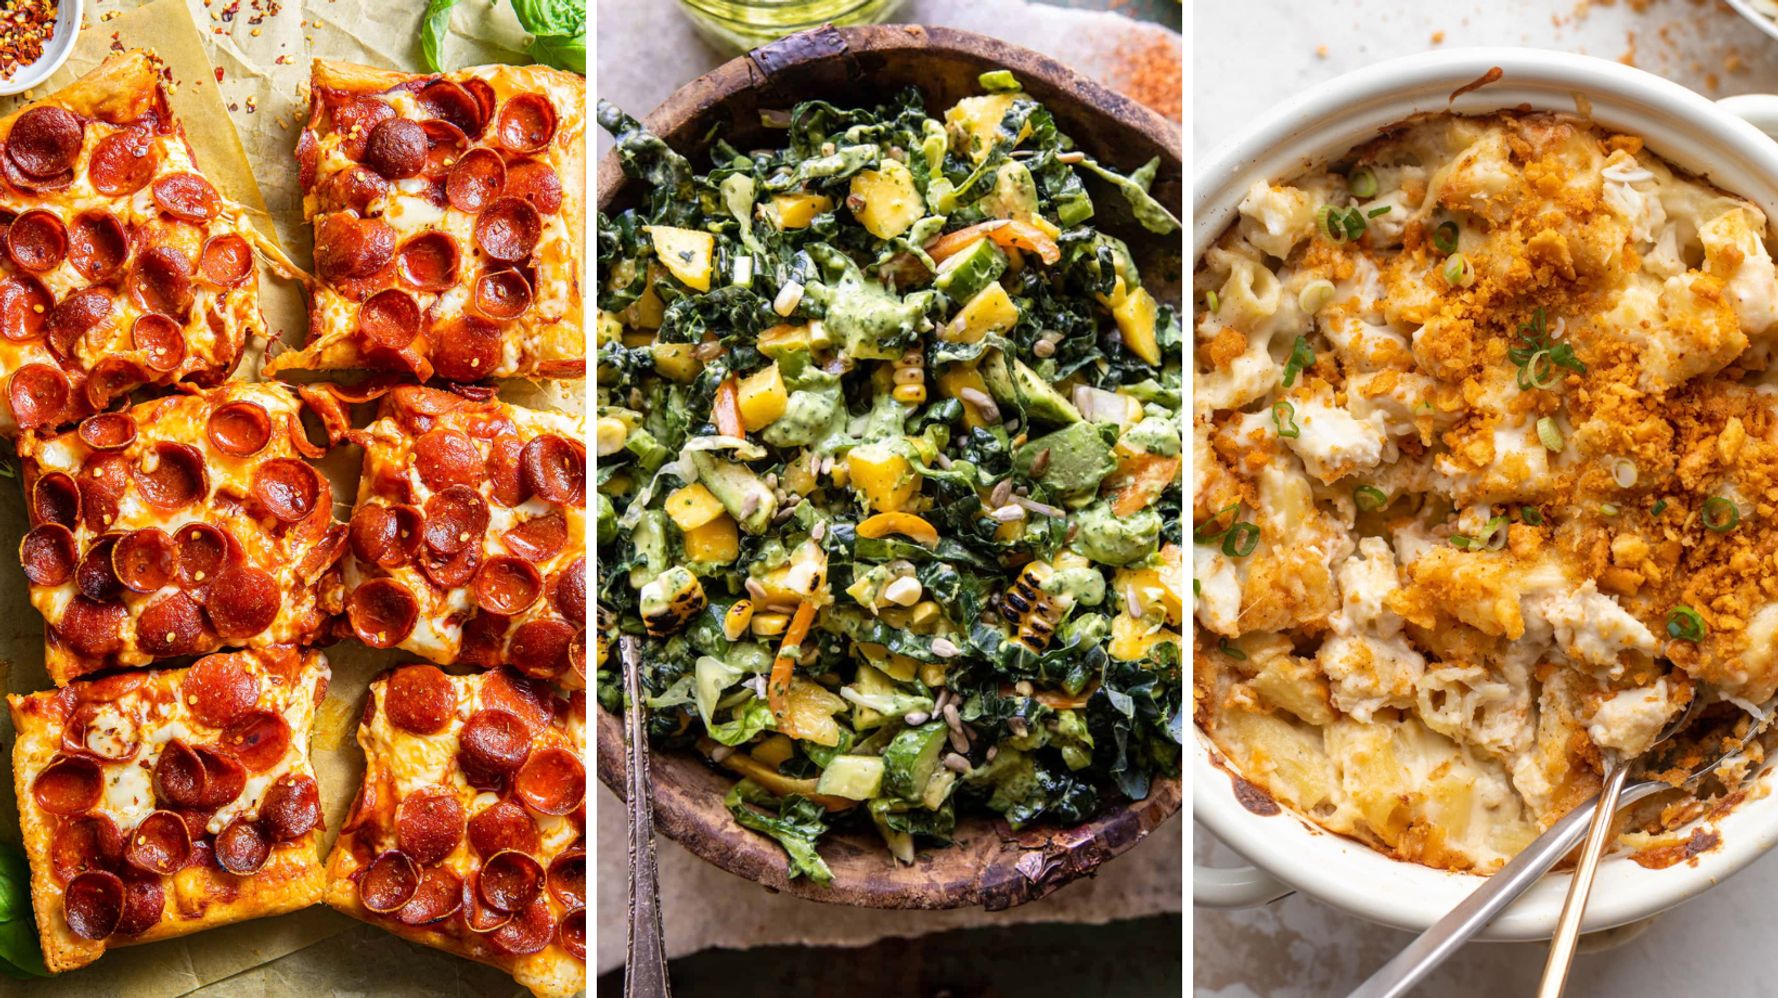 The 10 Best Instagram Recipes From June 2022